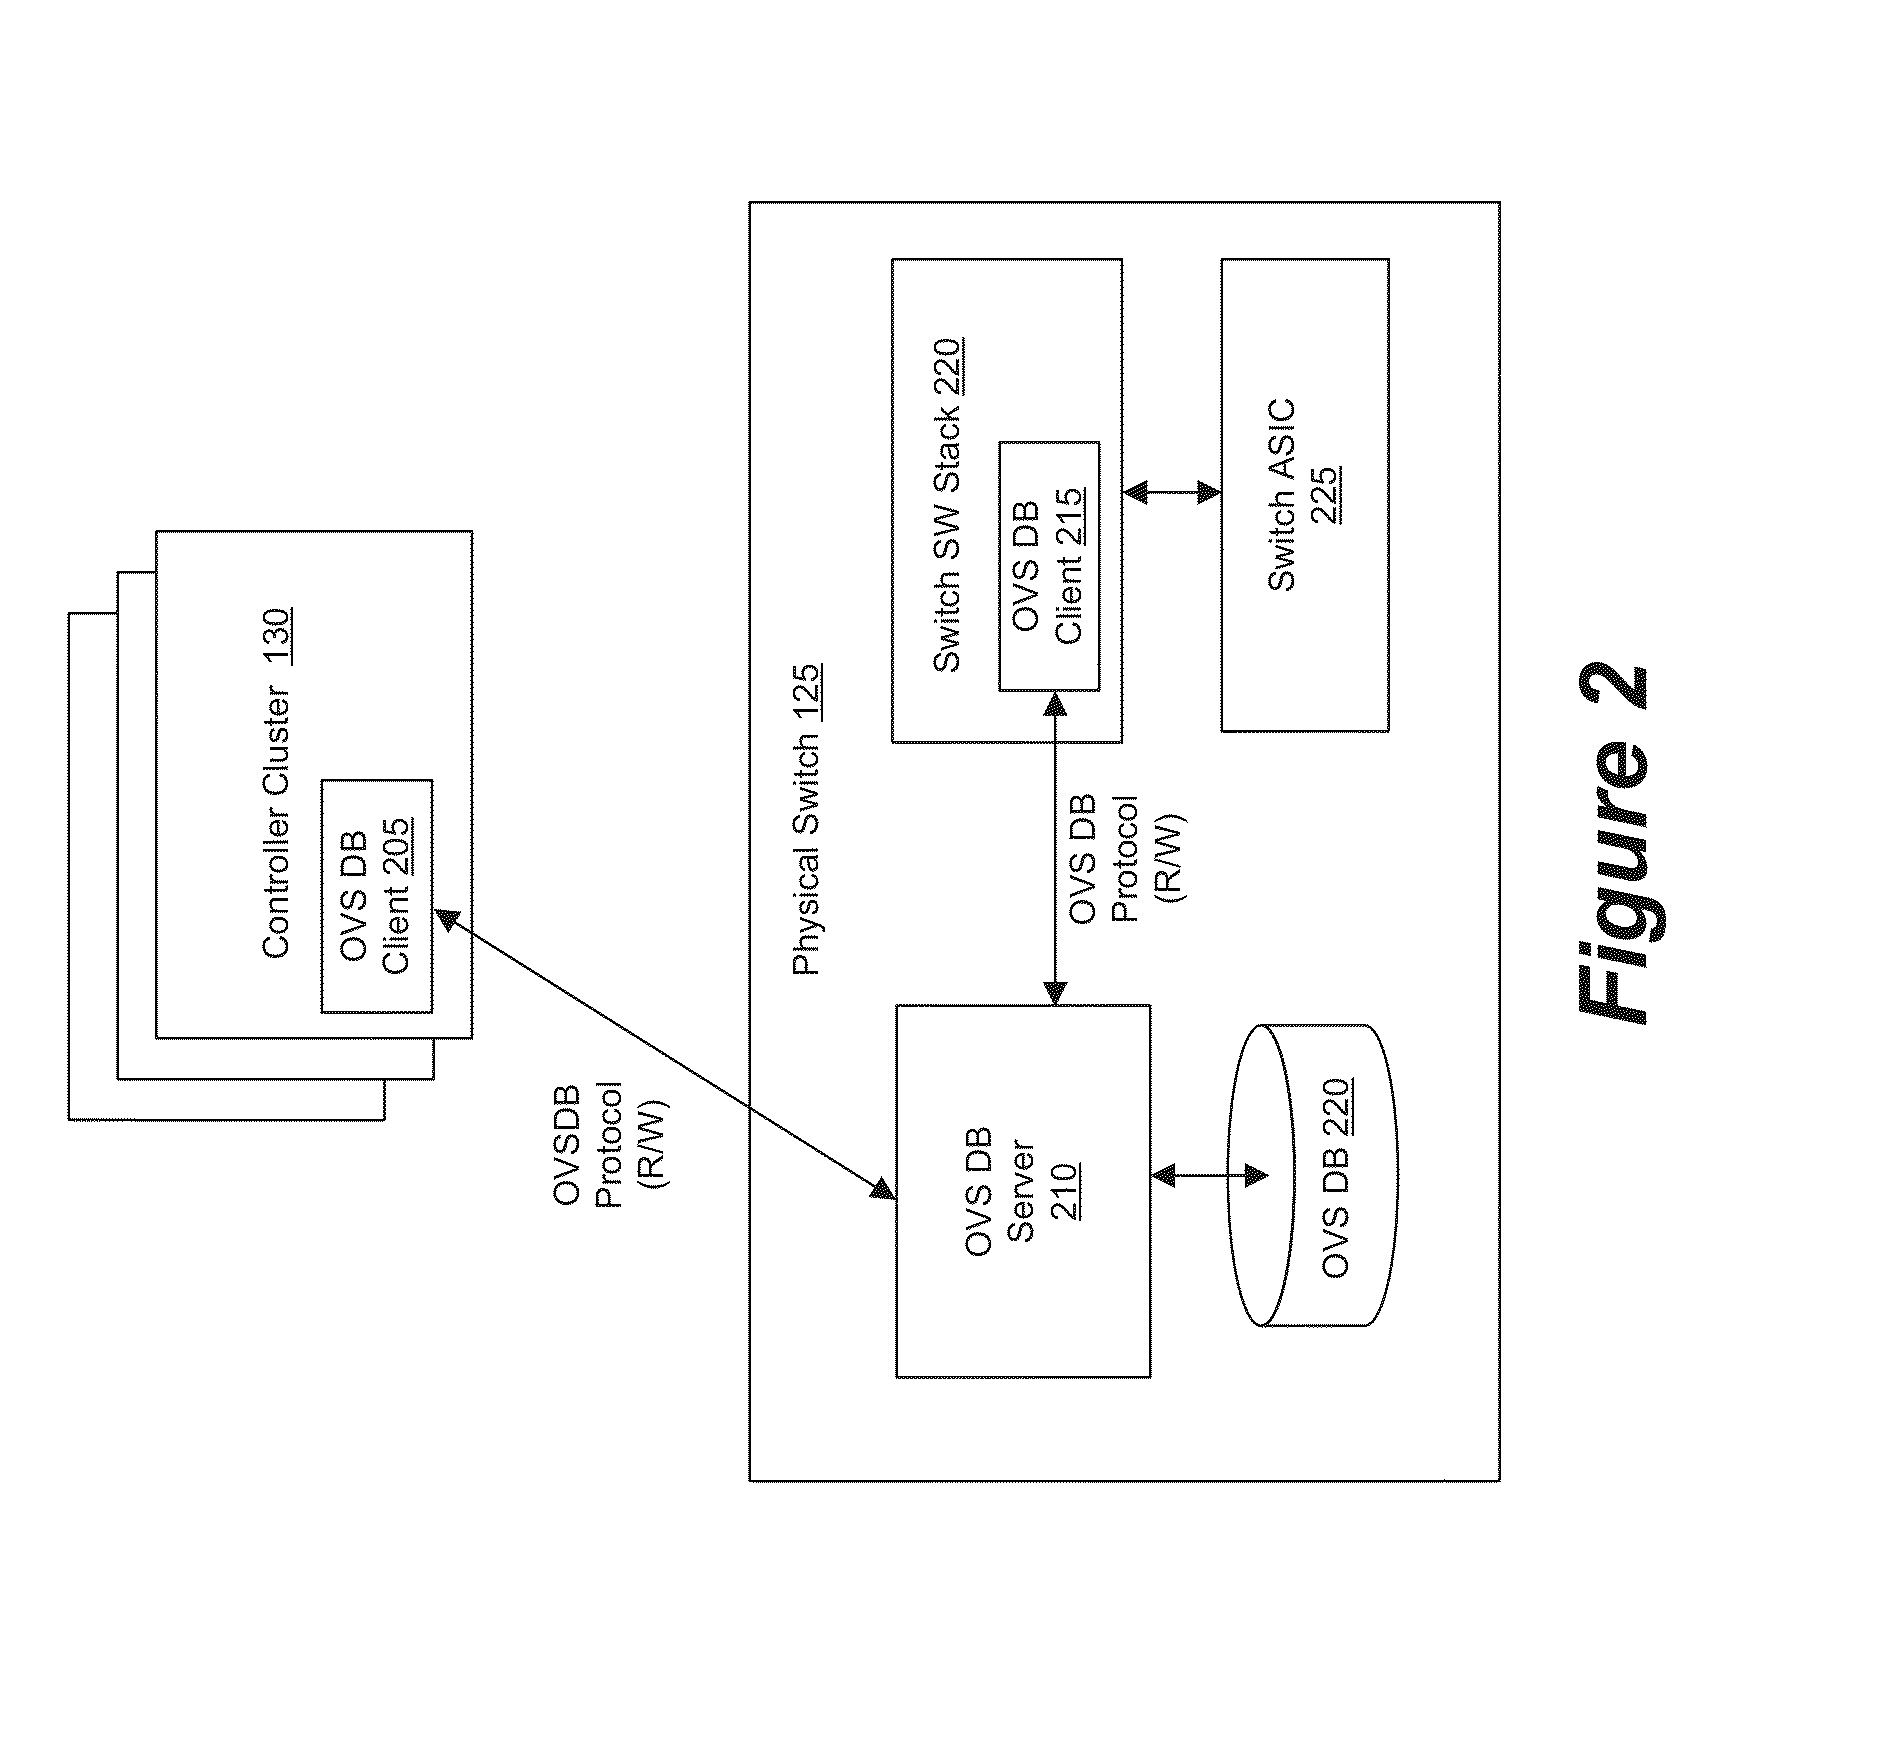 Network Controller for Managing Software and Hardware Forwarding Elements